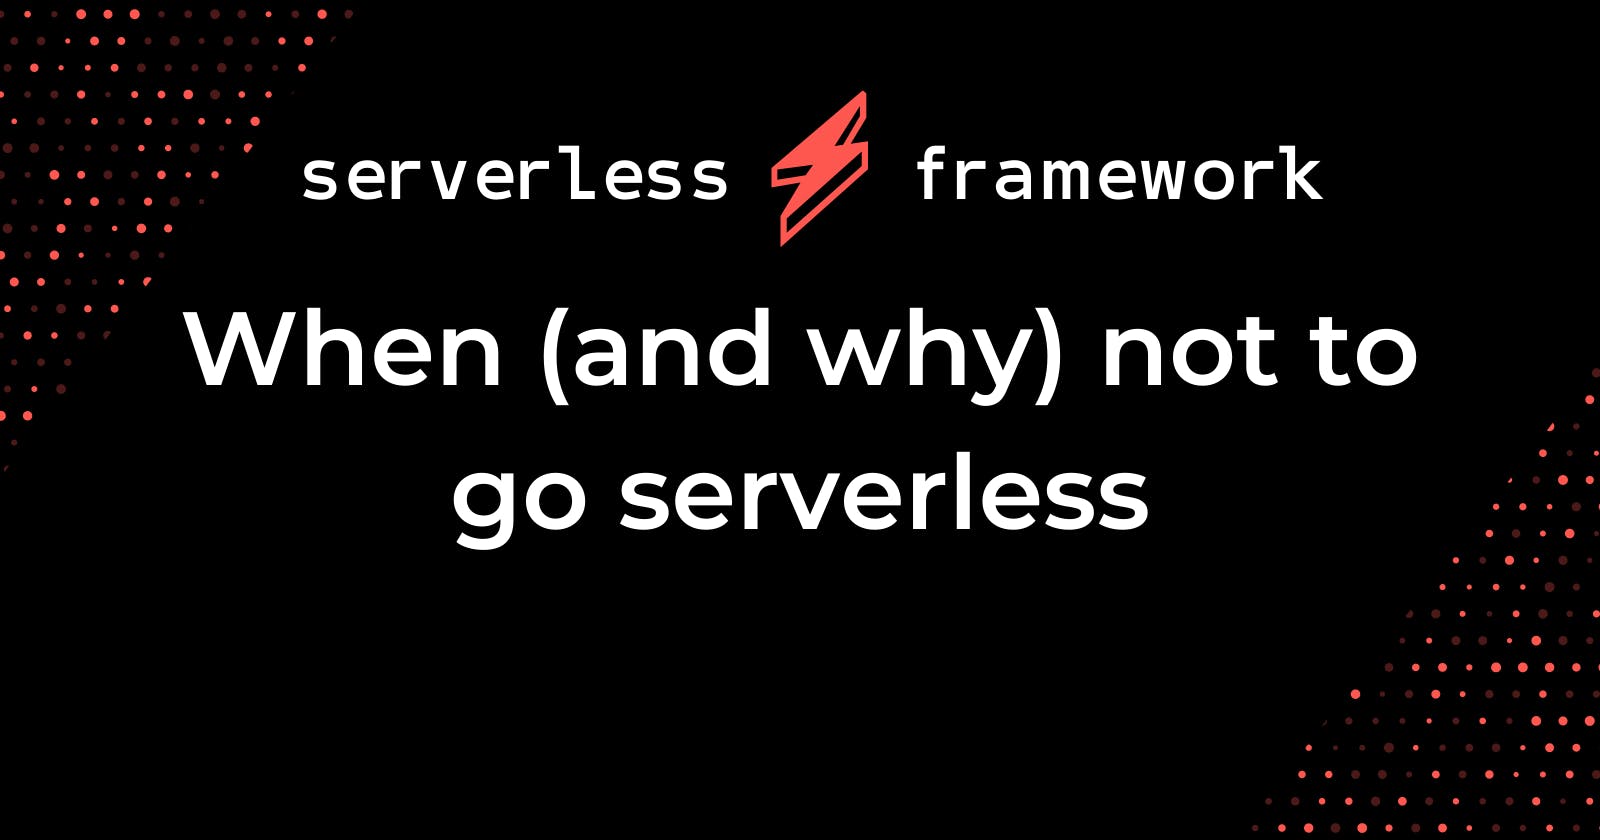 When (and why) not to go serverless